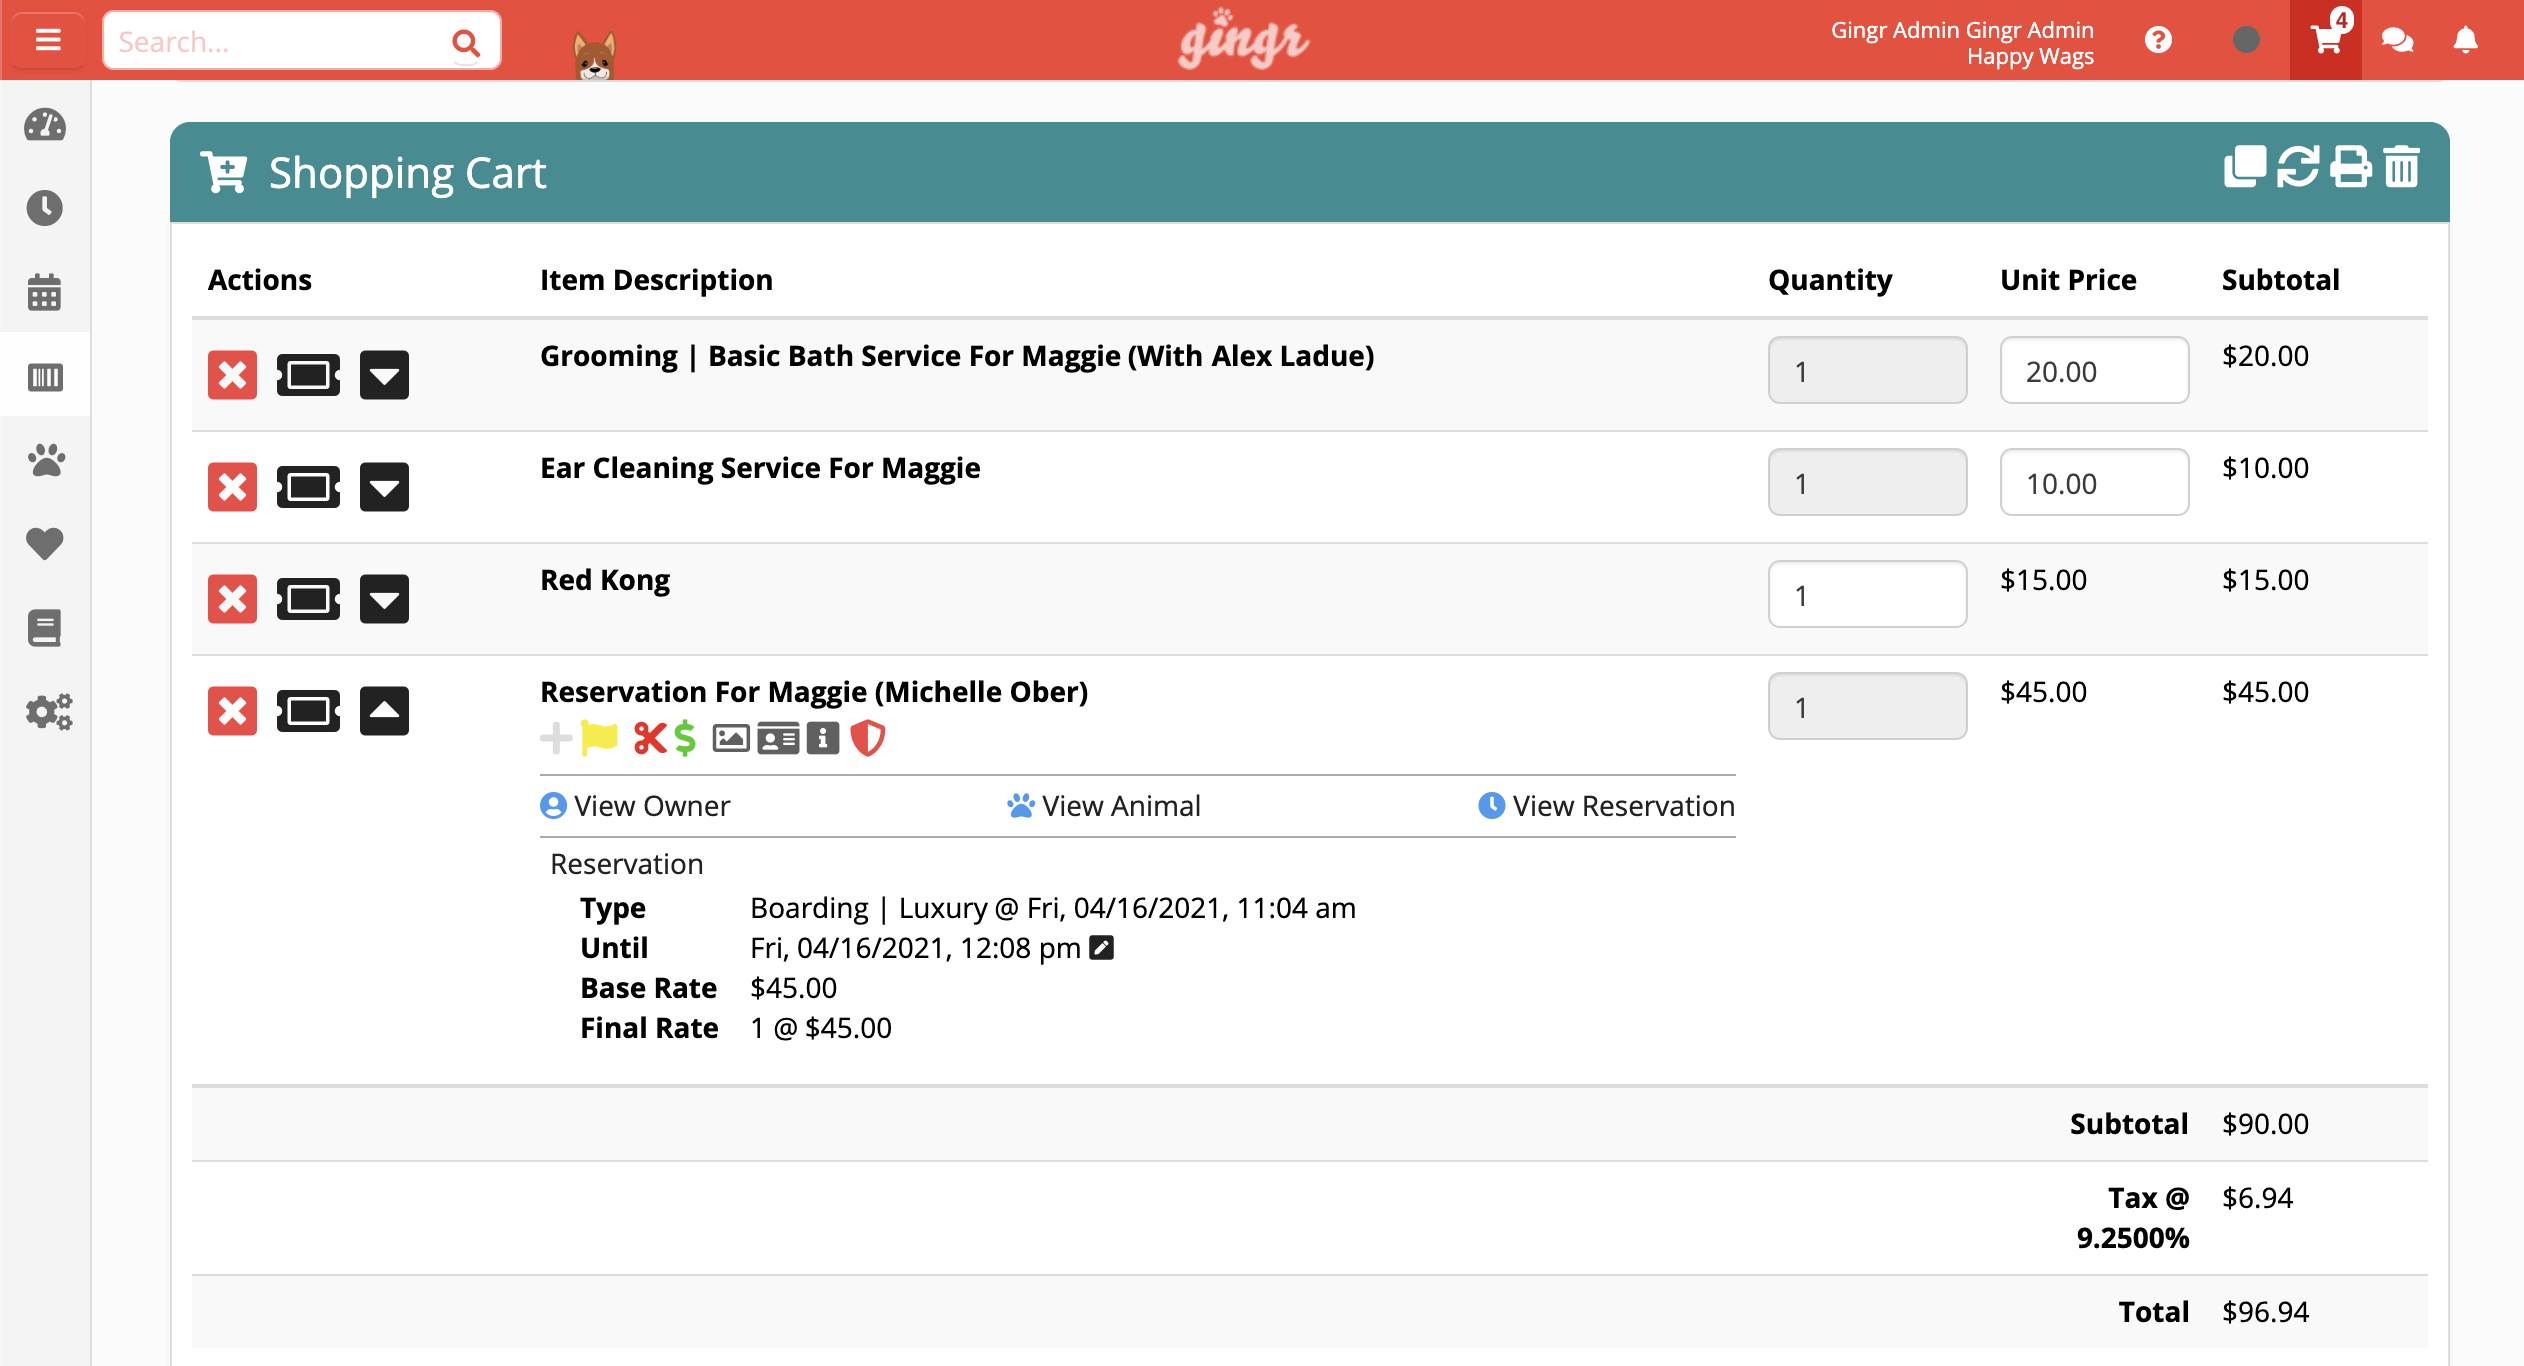 This screenshot of Gingr’s kennel software shows how you can manage reservations, services, and retail operations. 